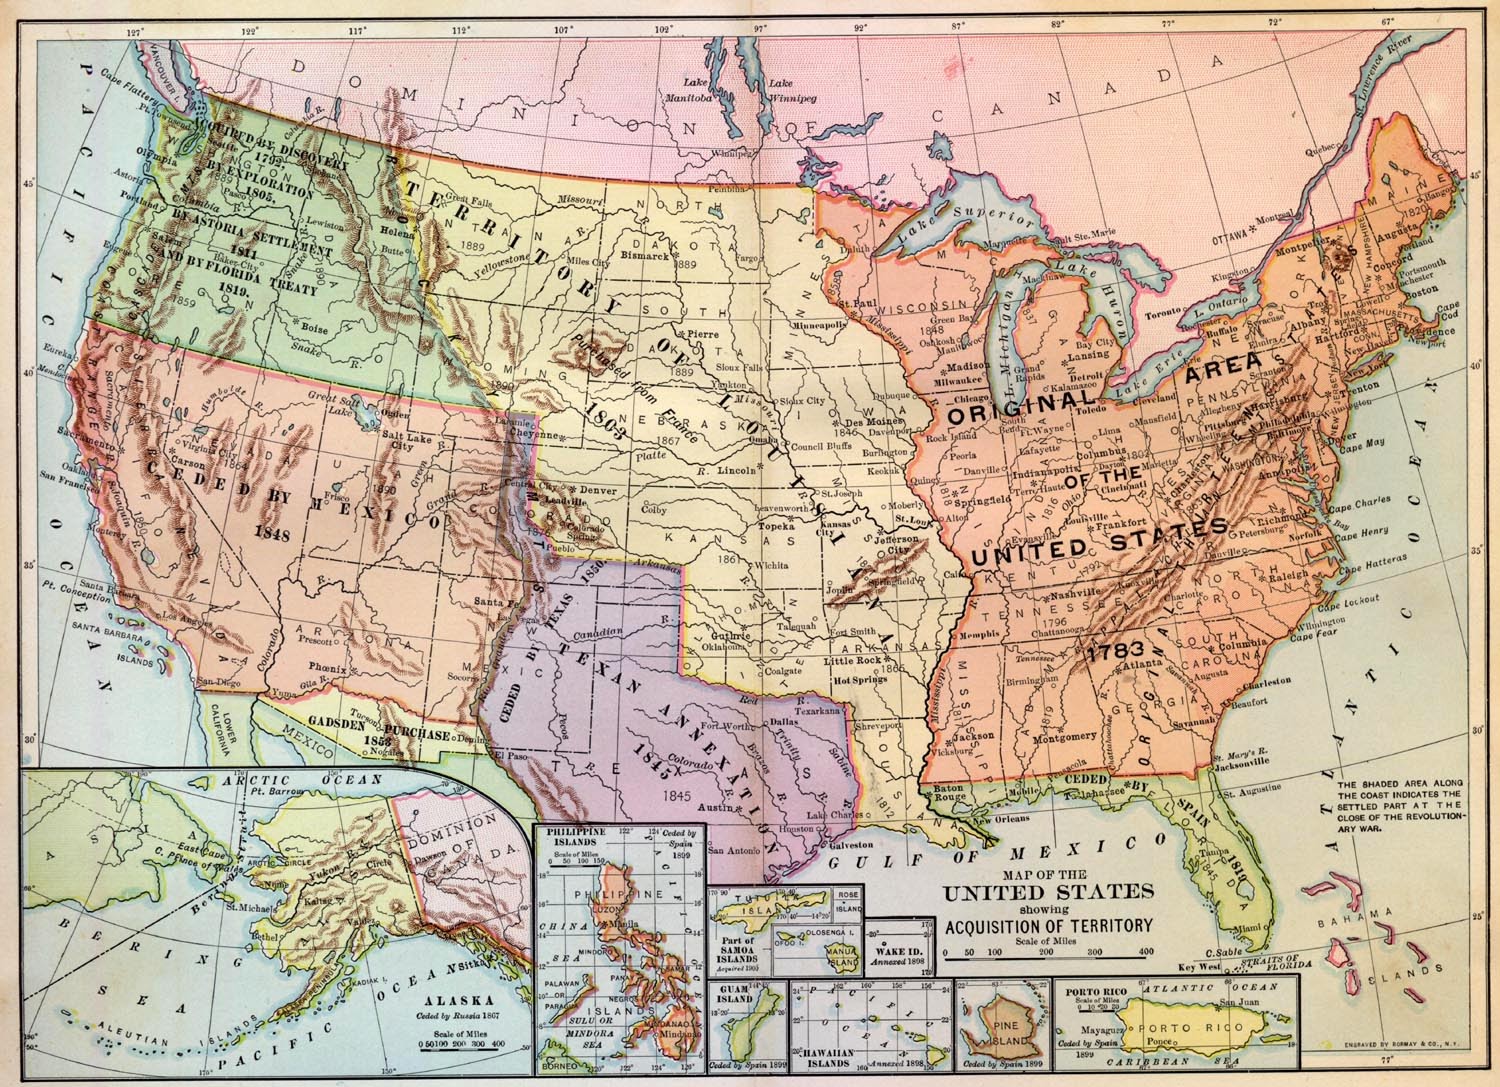 Issues in American Politics: Presidents and Gardens: Louisiana Purchase